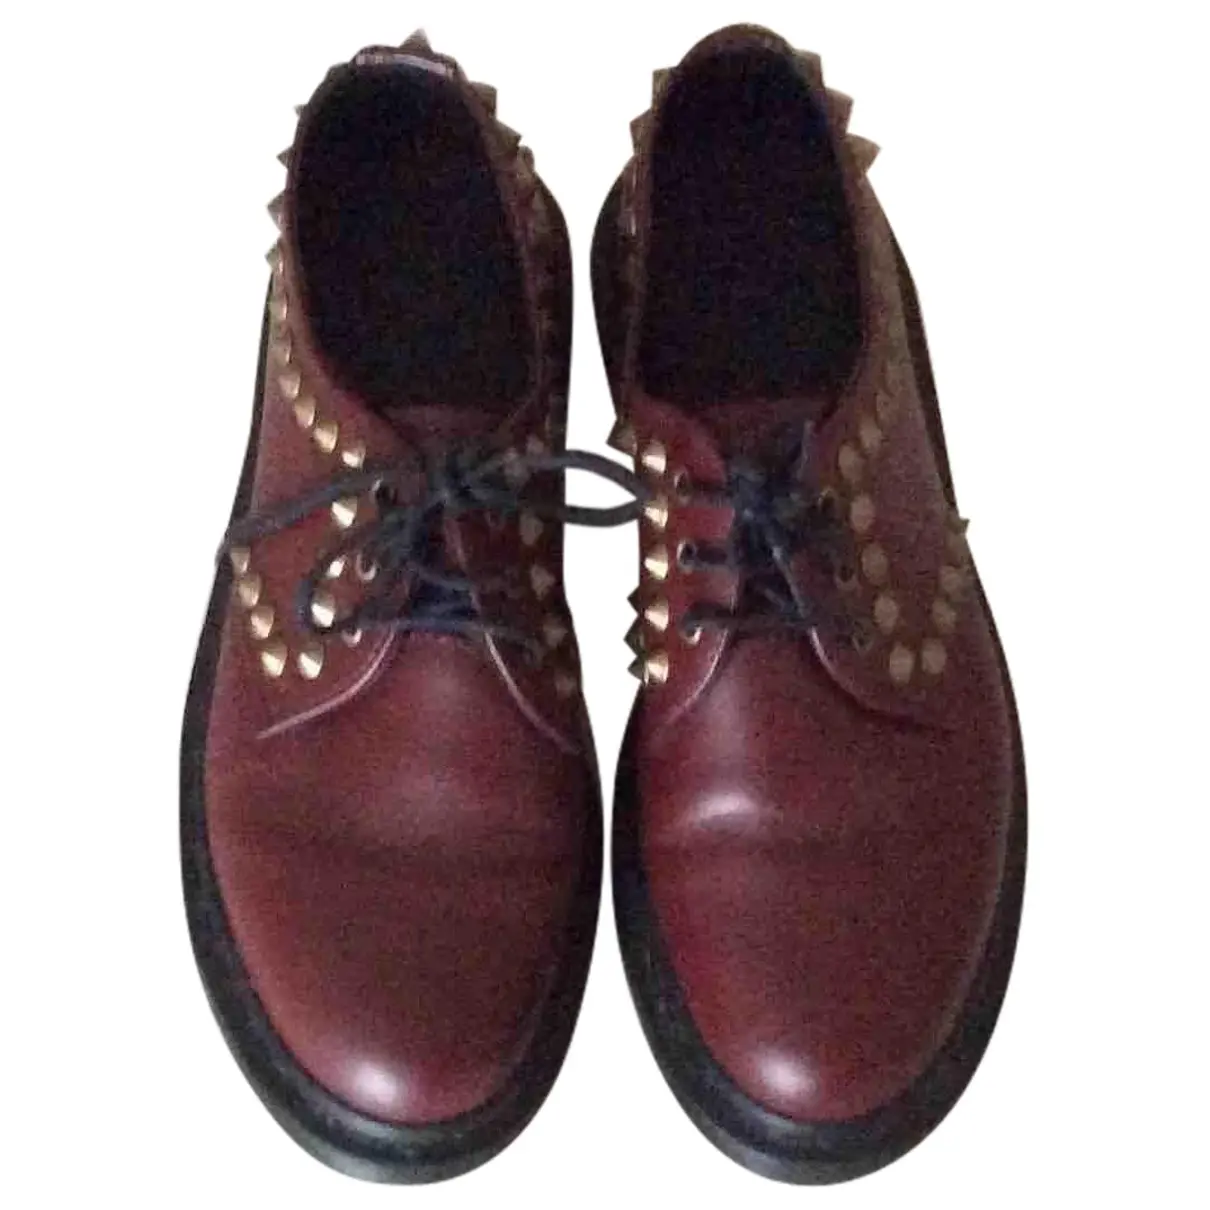 3989 (Brogue) leather lace ups Dr. Martens